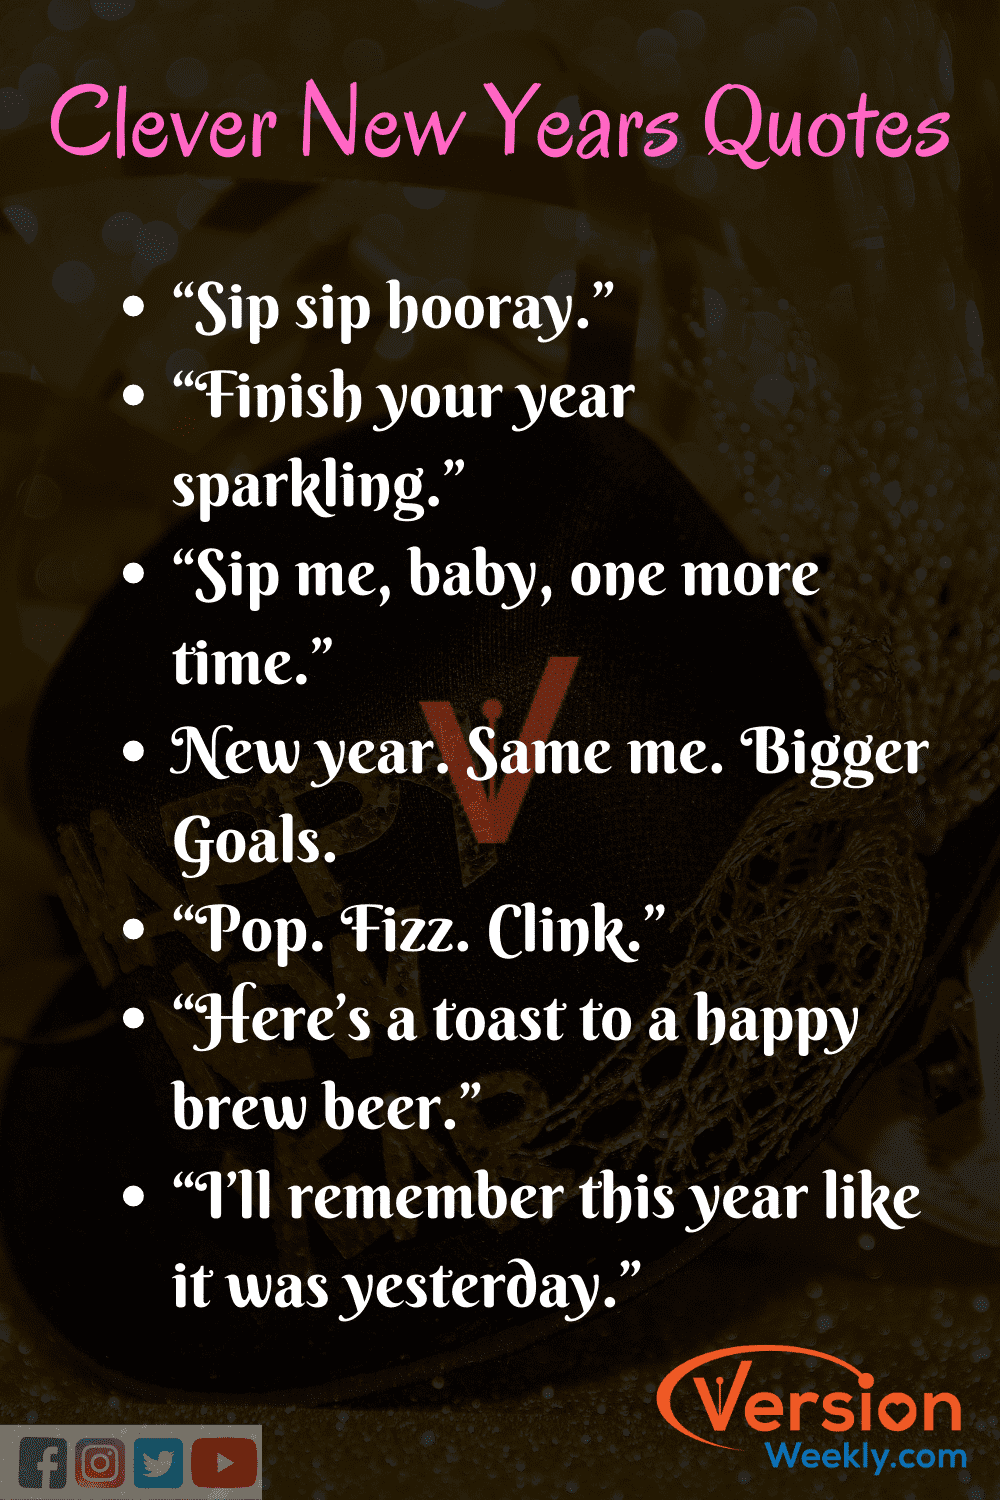 Top 30+ Clever Captions For New Year's Eve | Best Creative New Year's  Captions To Wrap Up The Year Sparkling | NYE End of the Year Quotes –  Version Weekly